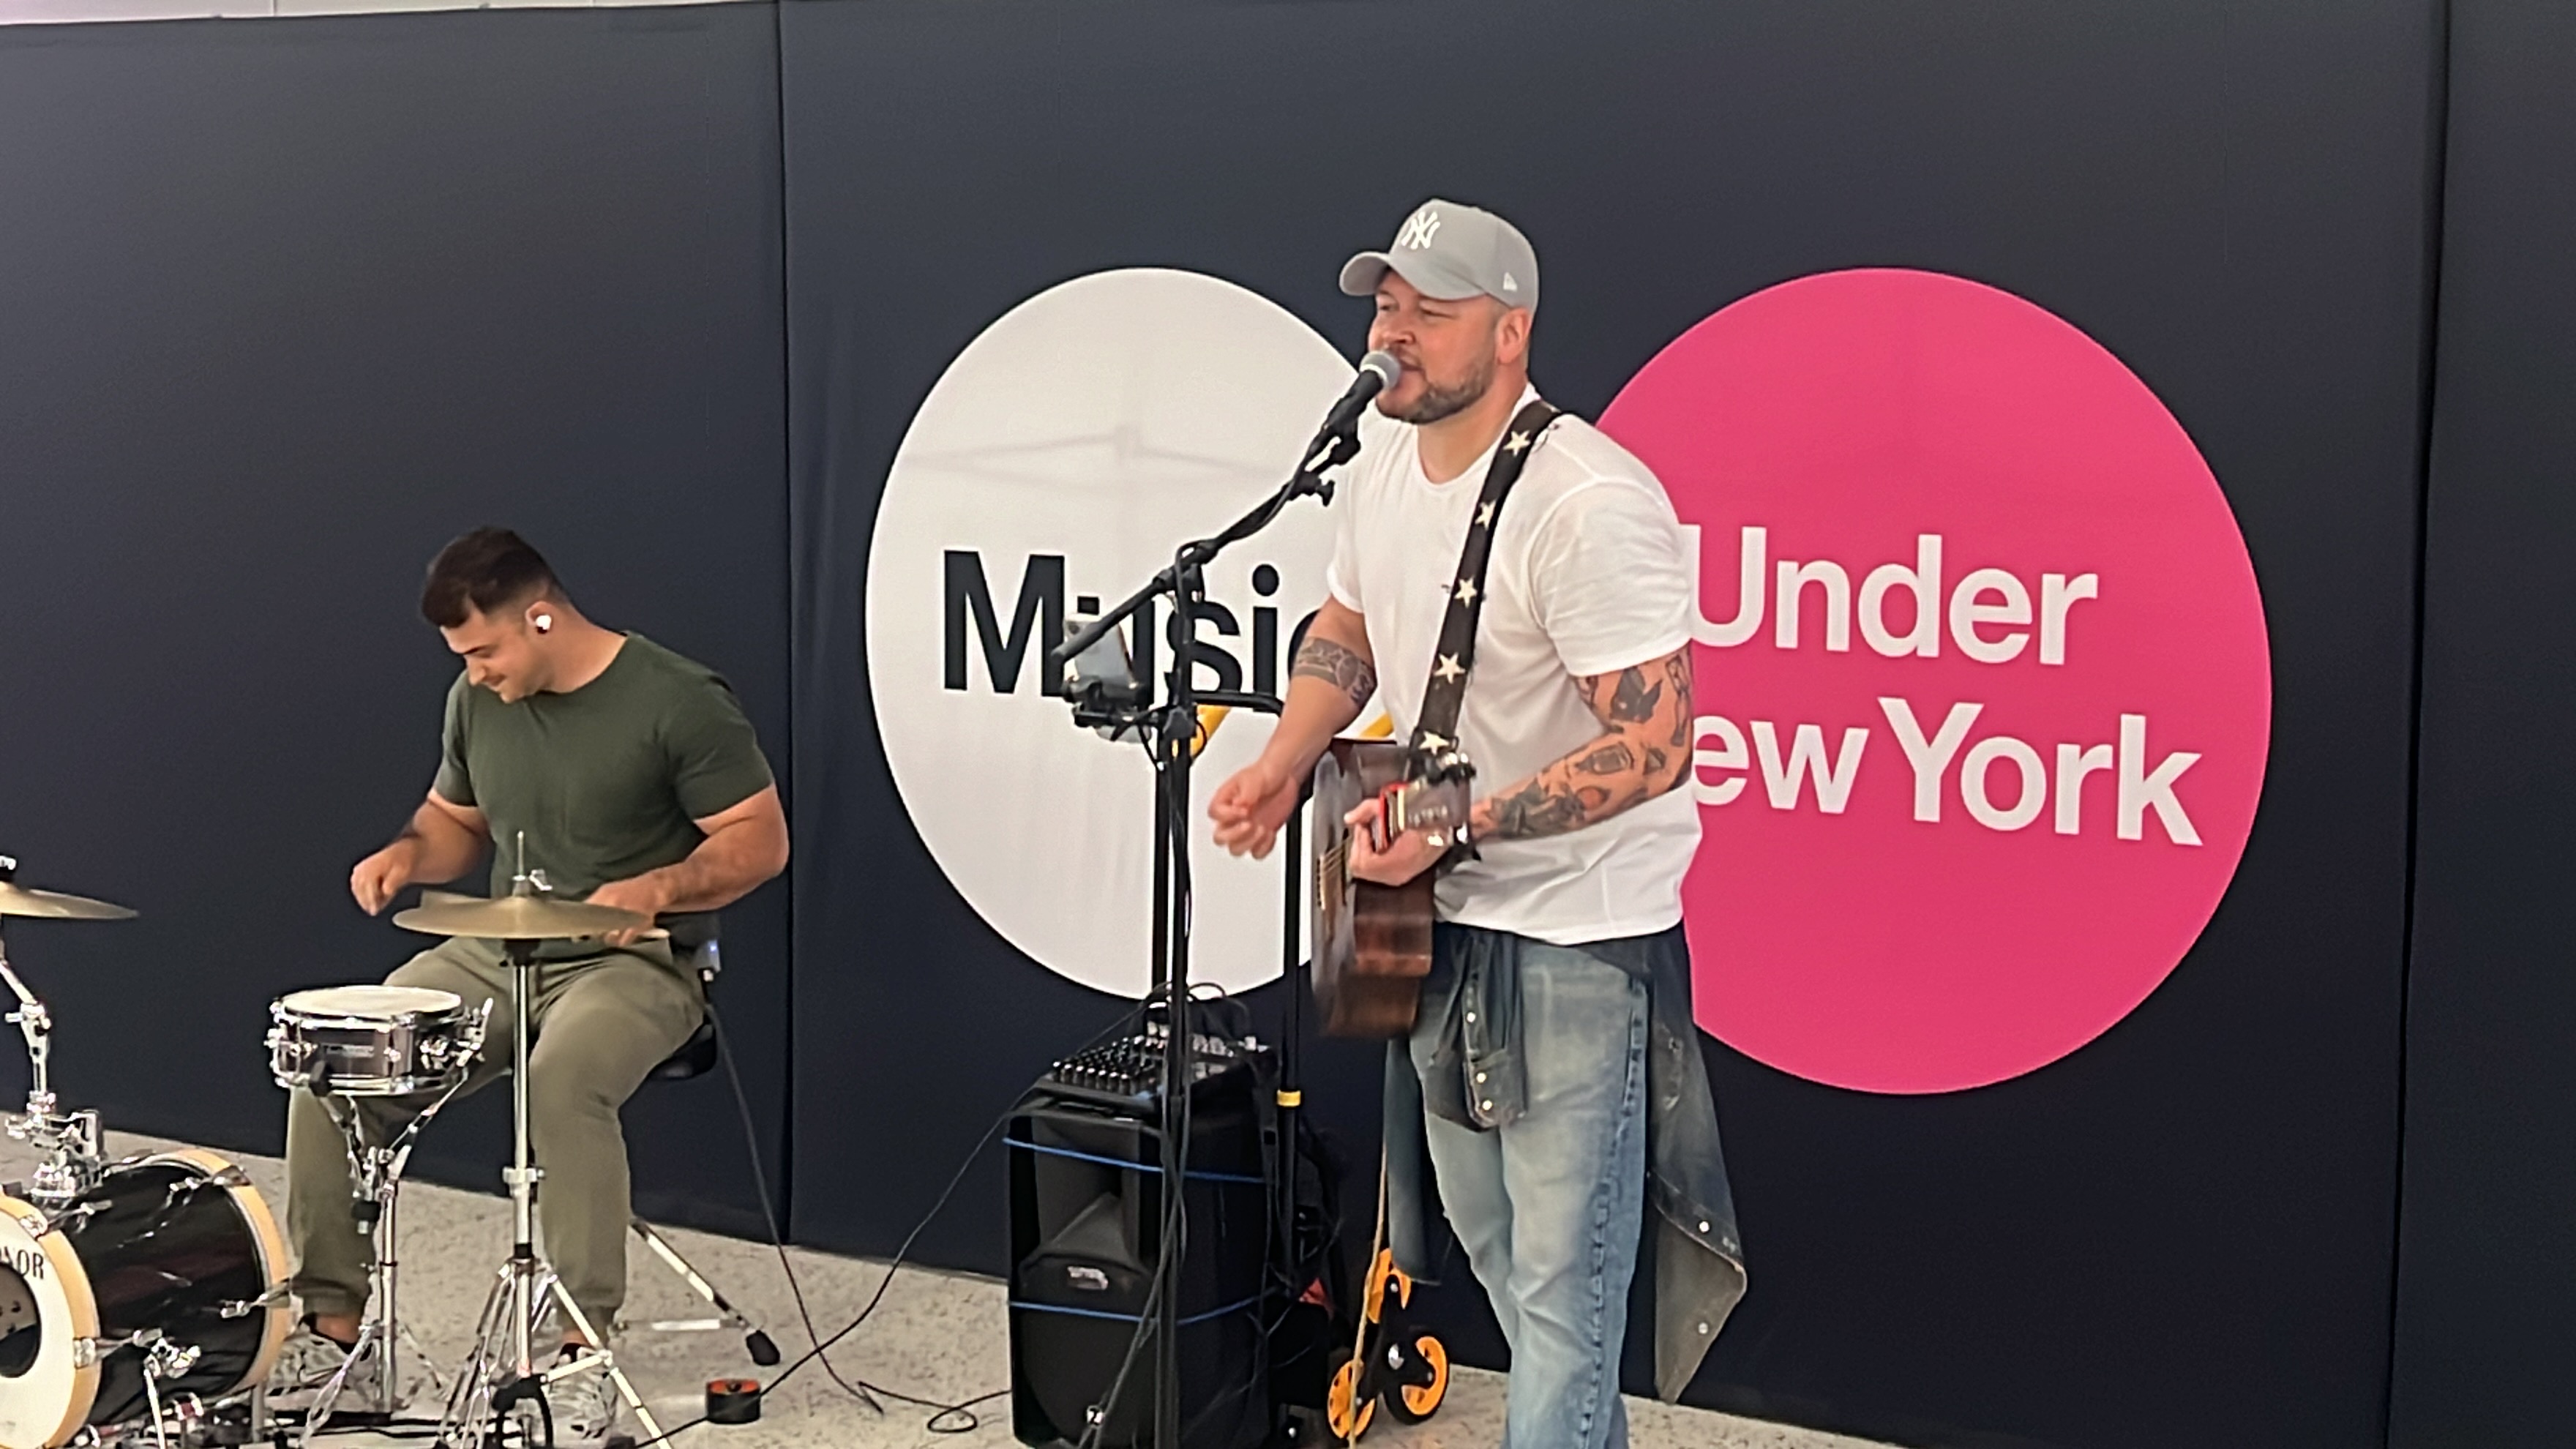 MTA Arts & Design Hosts Music Under New York Auditions at Grand Central Madison 